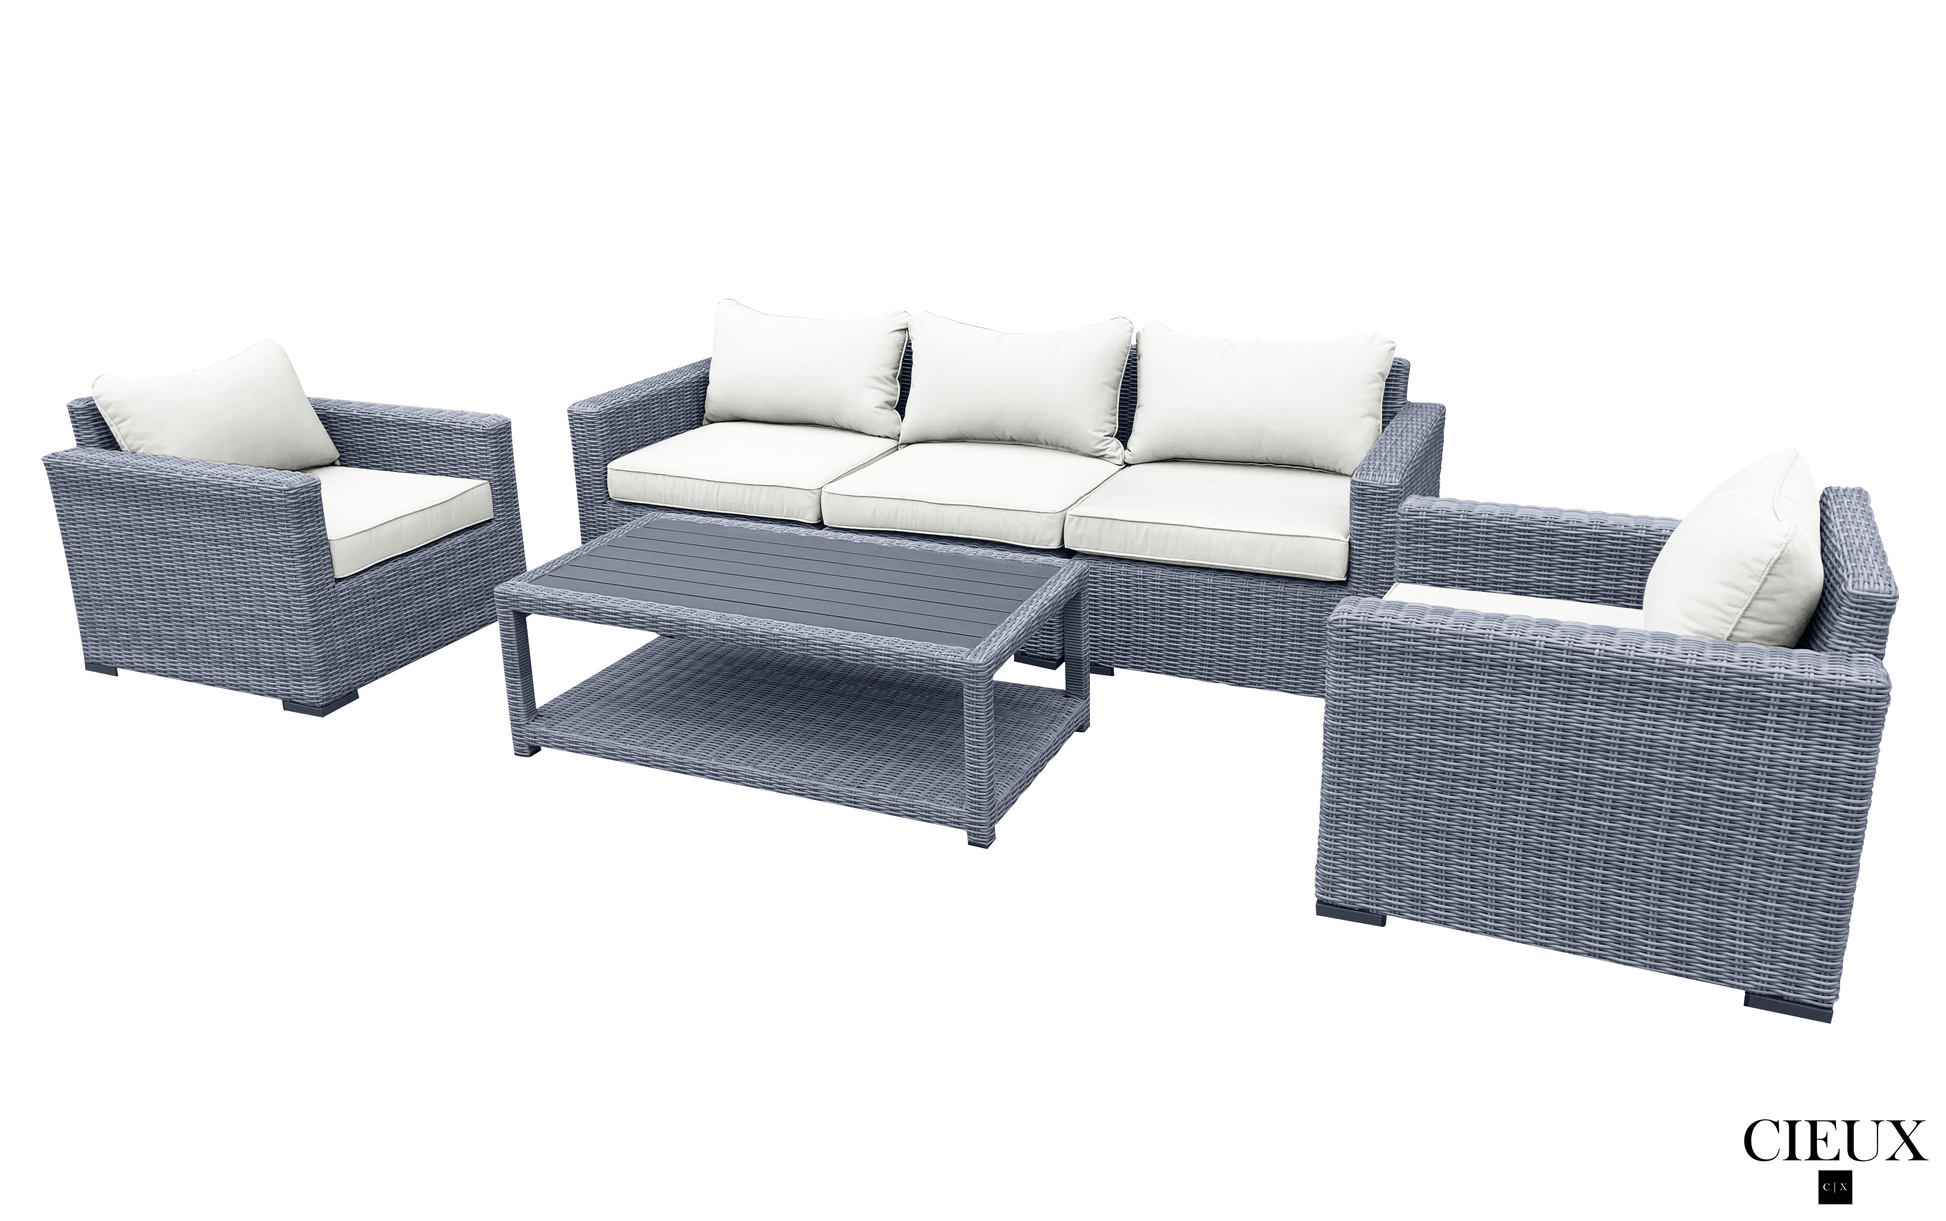 CIEUX Conversation Set Canvas Natural Cannes Outdoor Patio Wicker Sofa Conversation Set in Grey with Sunbrella Cushions - Available in 2 Colours